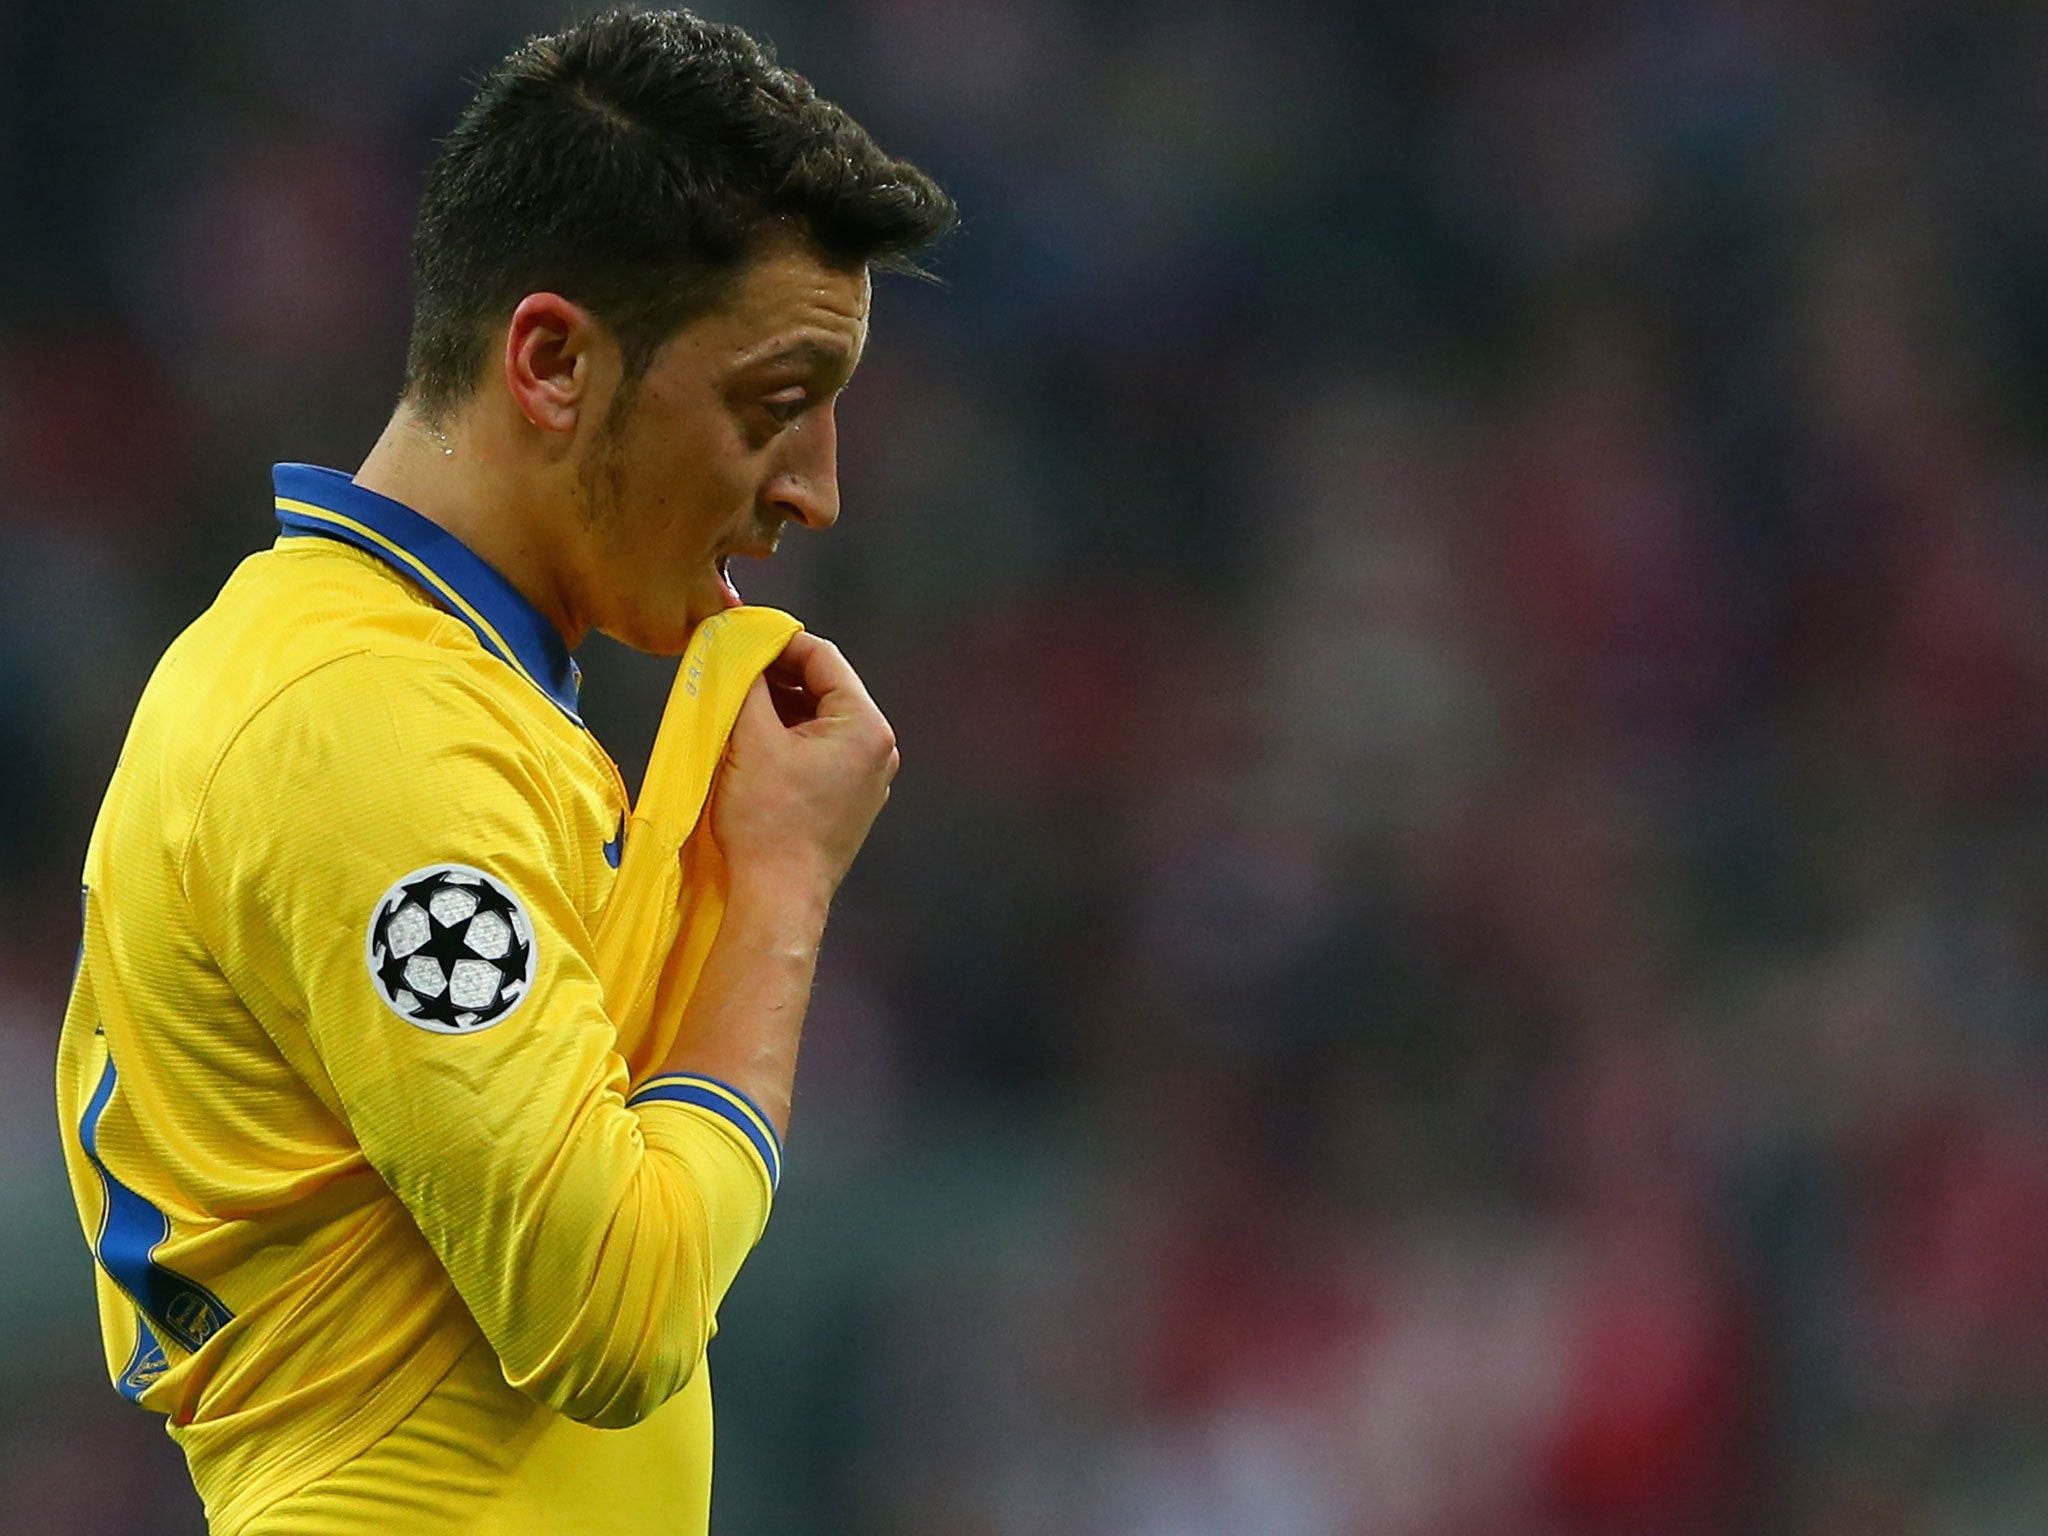 Mesut Ozil is close to returning to Arsenal's starting XI